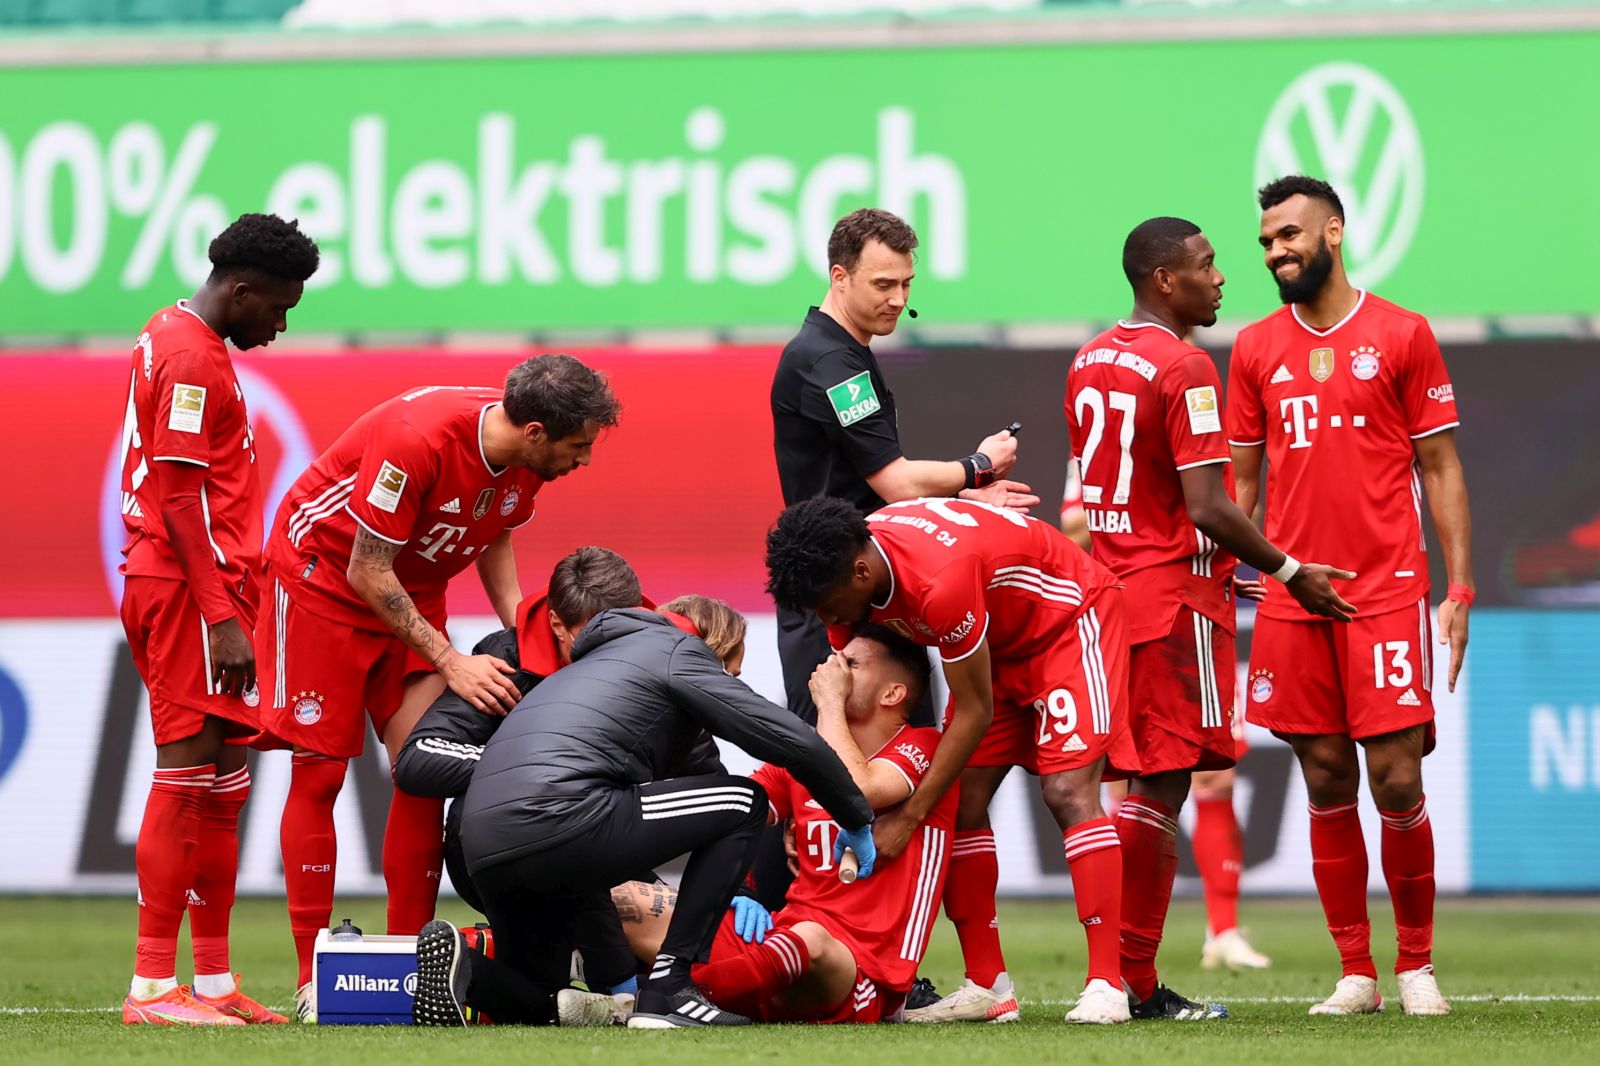 epa09141780 Lucas Hernandez of FC Bayern Muenchen receives medical treatment as teammate Kingsley Coman checks on him during the German Bundesliga soccer match between VfL Wolfsburg and FC Bayern Munich at Volkswagen Arena in Wolfsburg, Germany, 17 April 2021.  EPA/MARTIN ROSE / POOL DFL regulations prohibit any use of photographs as image sequences and/or quasi-video.